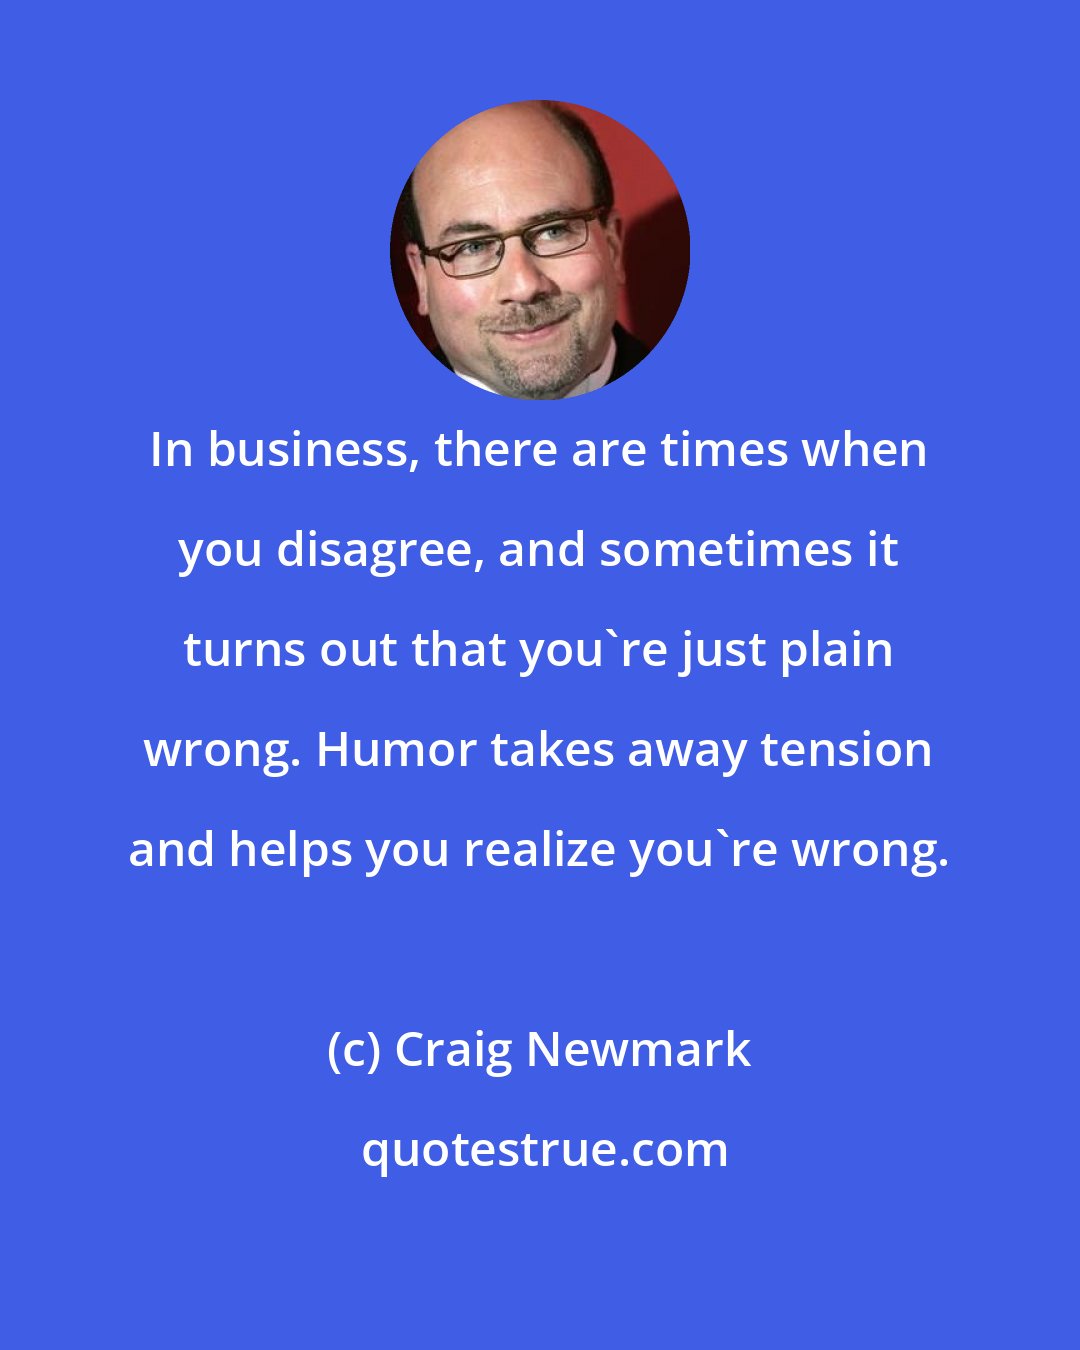 Craig Newmark: In business, there are times when you disagree, and sometimes it turns out that you're just plain wrong. Humor takes away tension and helps you realize you're wrong.